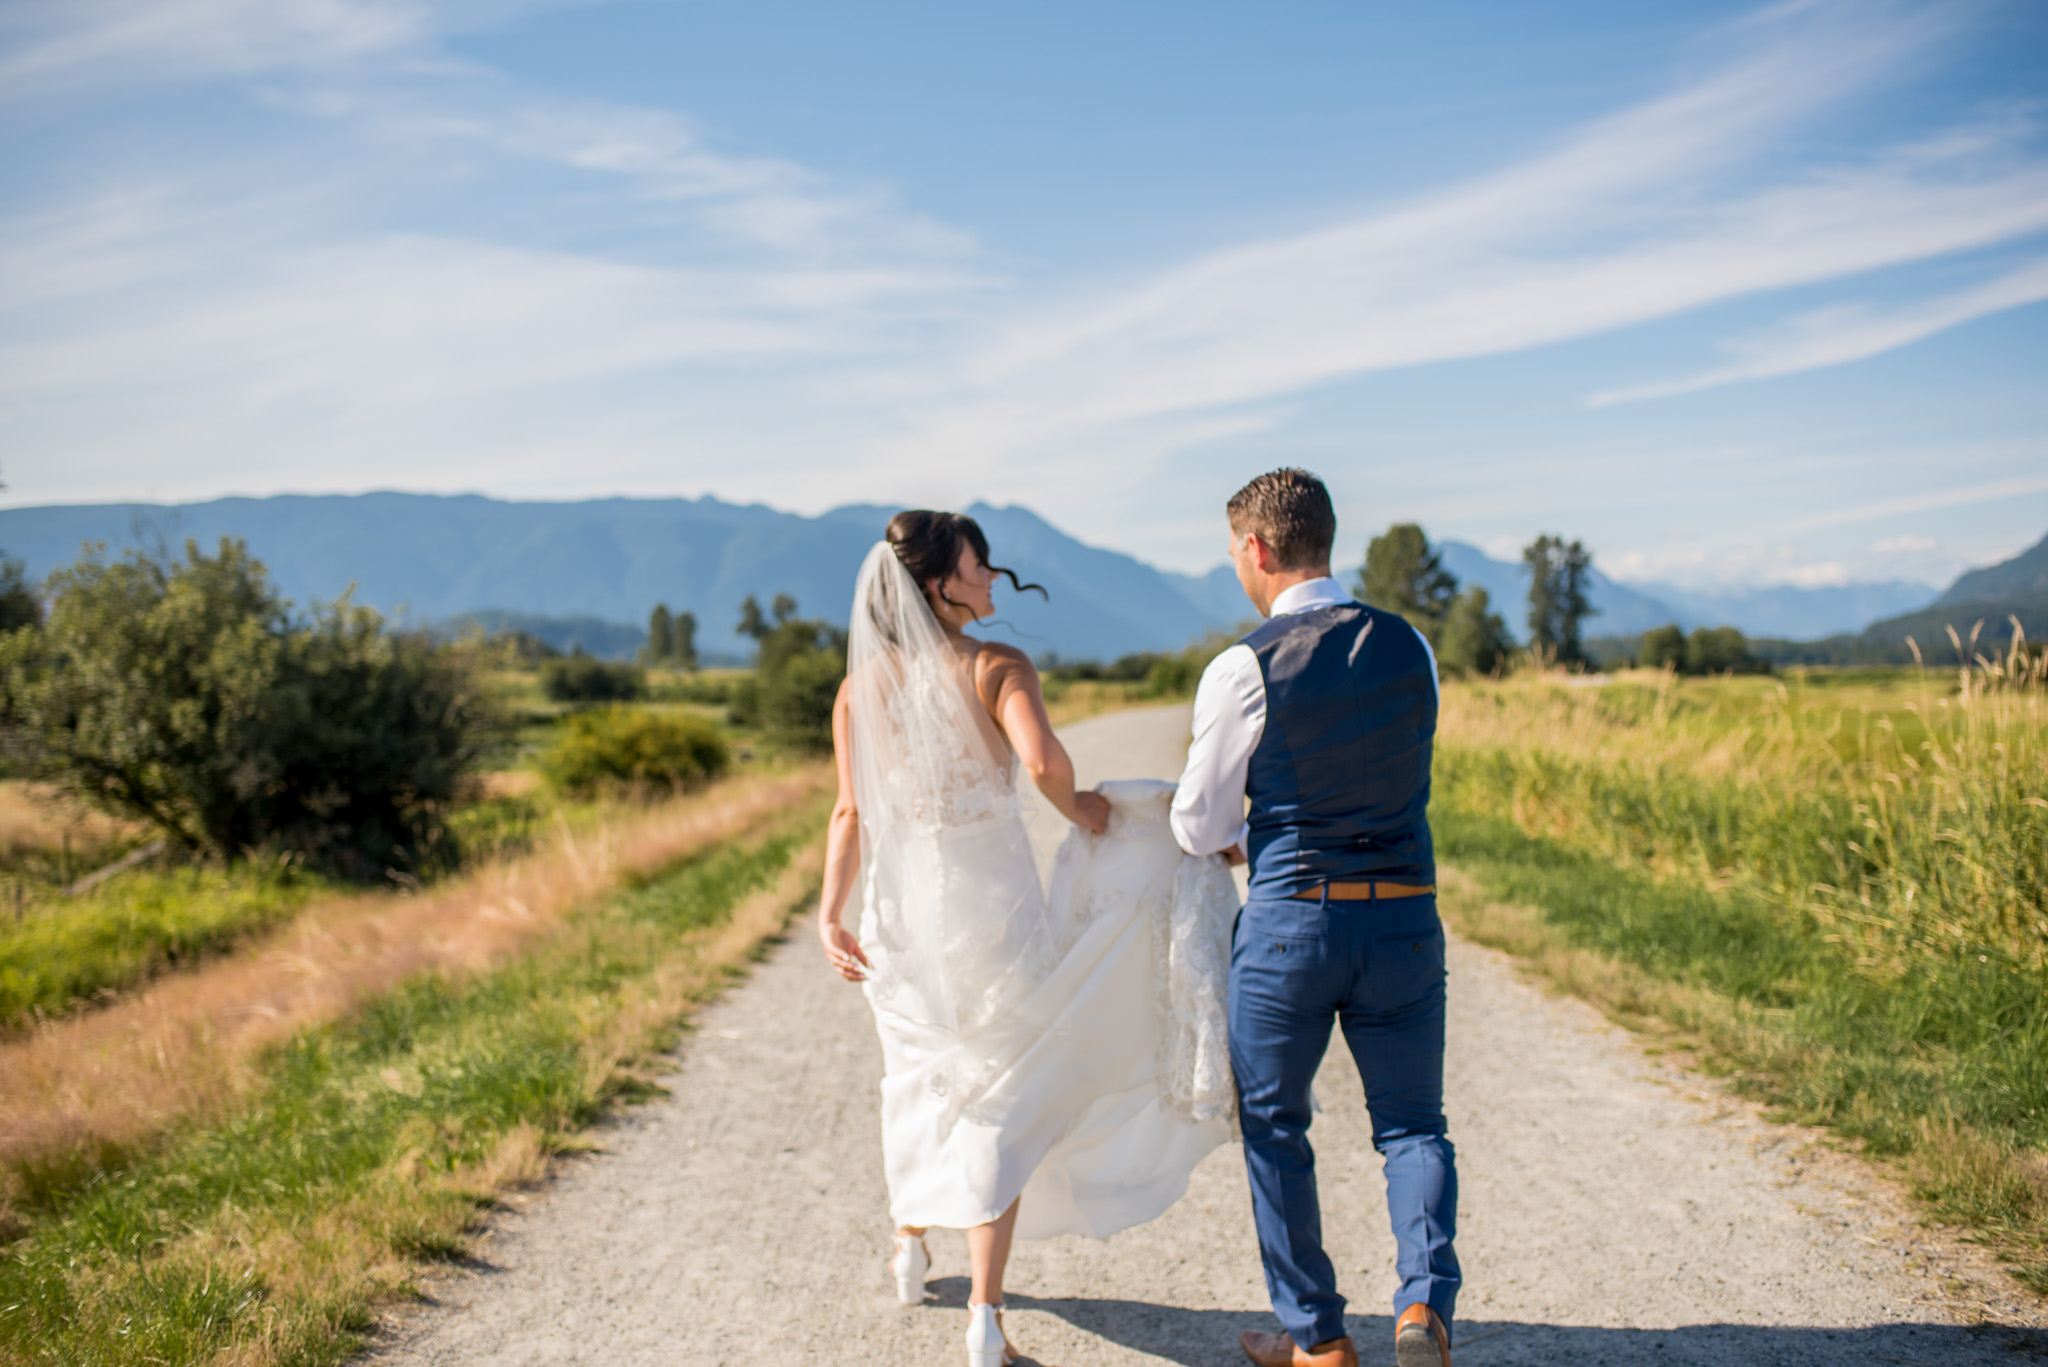 Bride and Groom walking in Jerry Sulina Park, Maple Ridge, BC